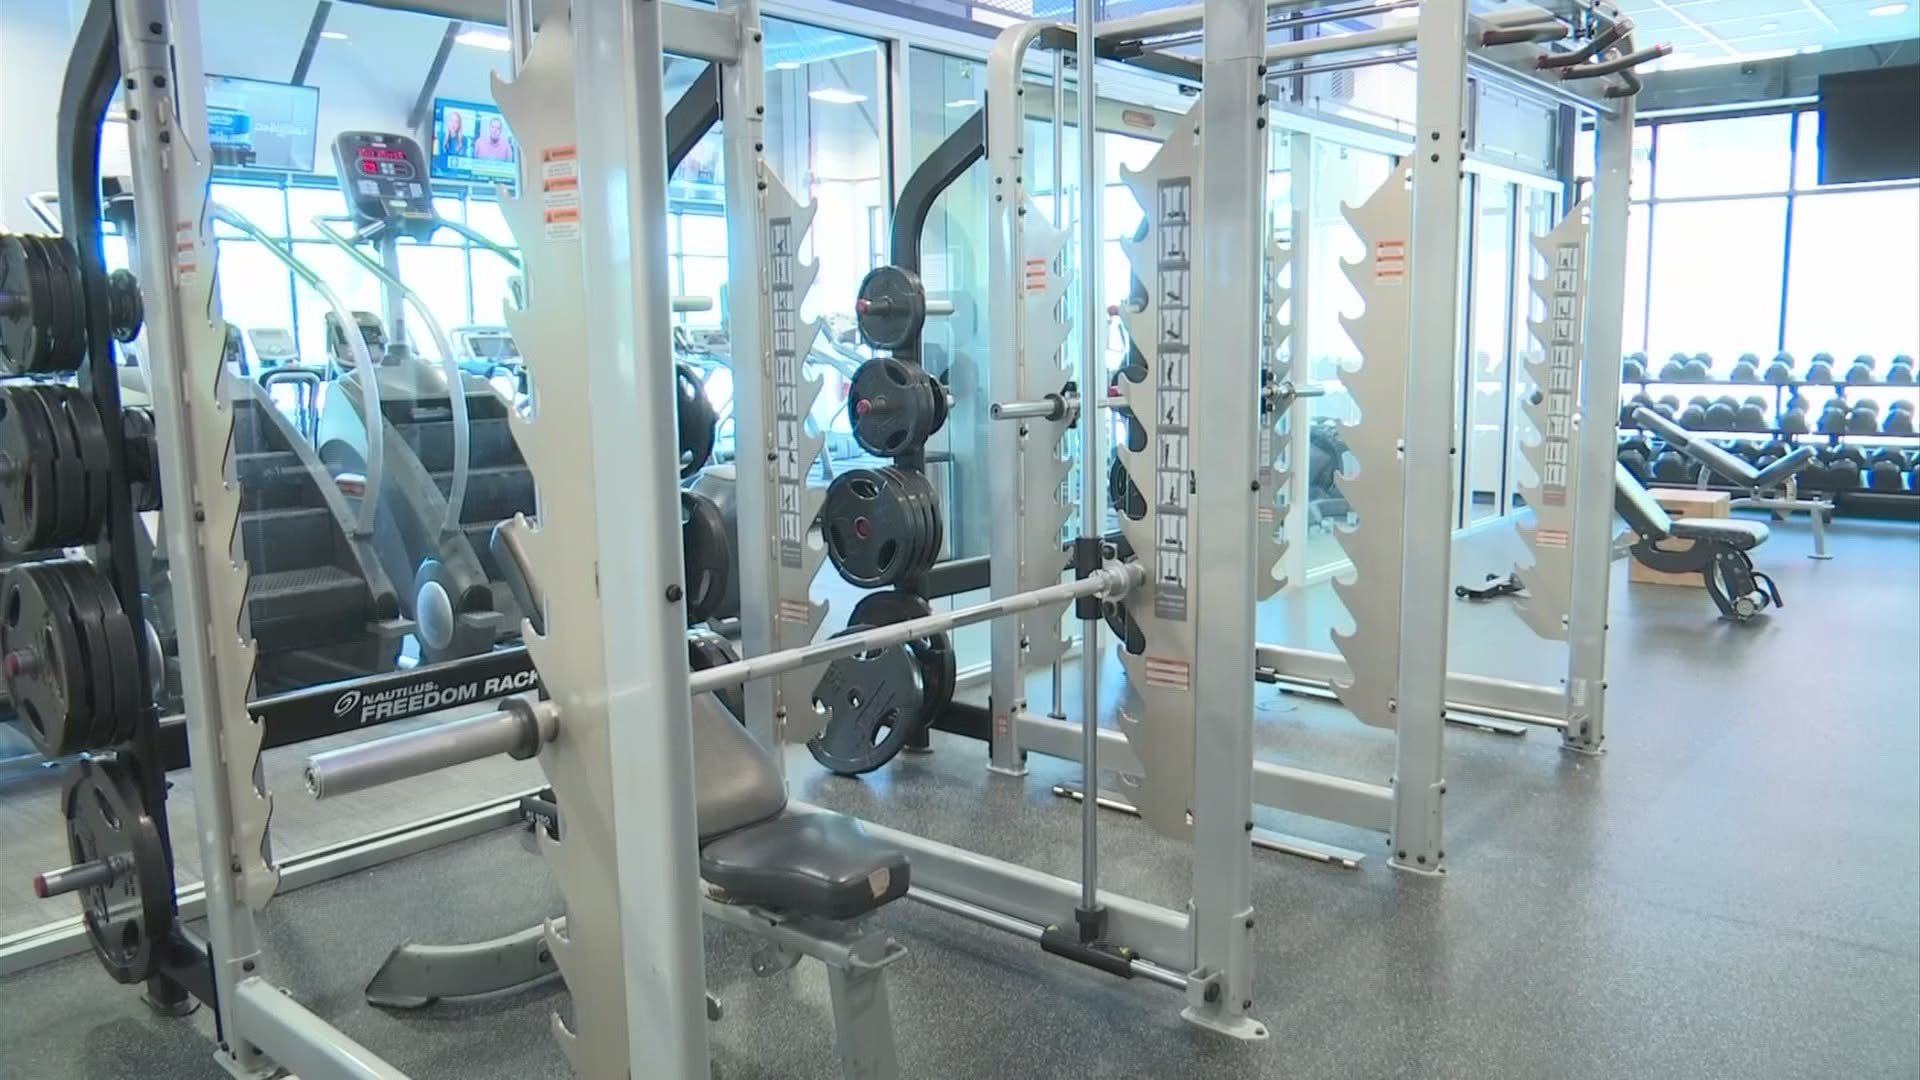 Fitness centers have taken several steps to ensure that people who come to work out can do so safely.